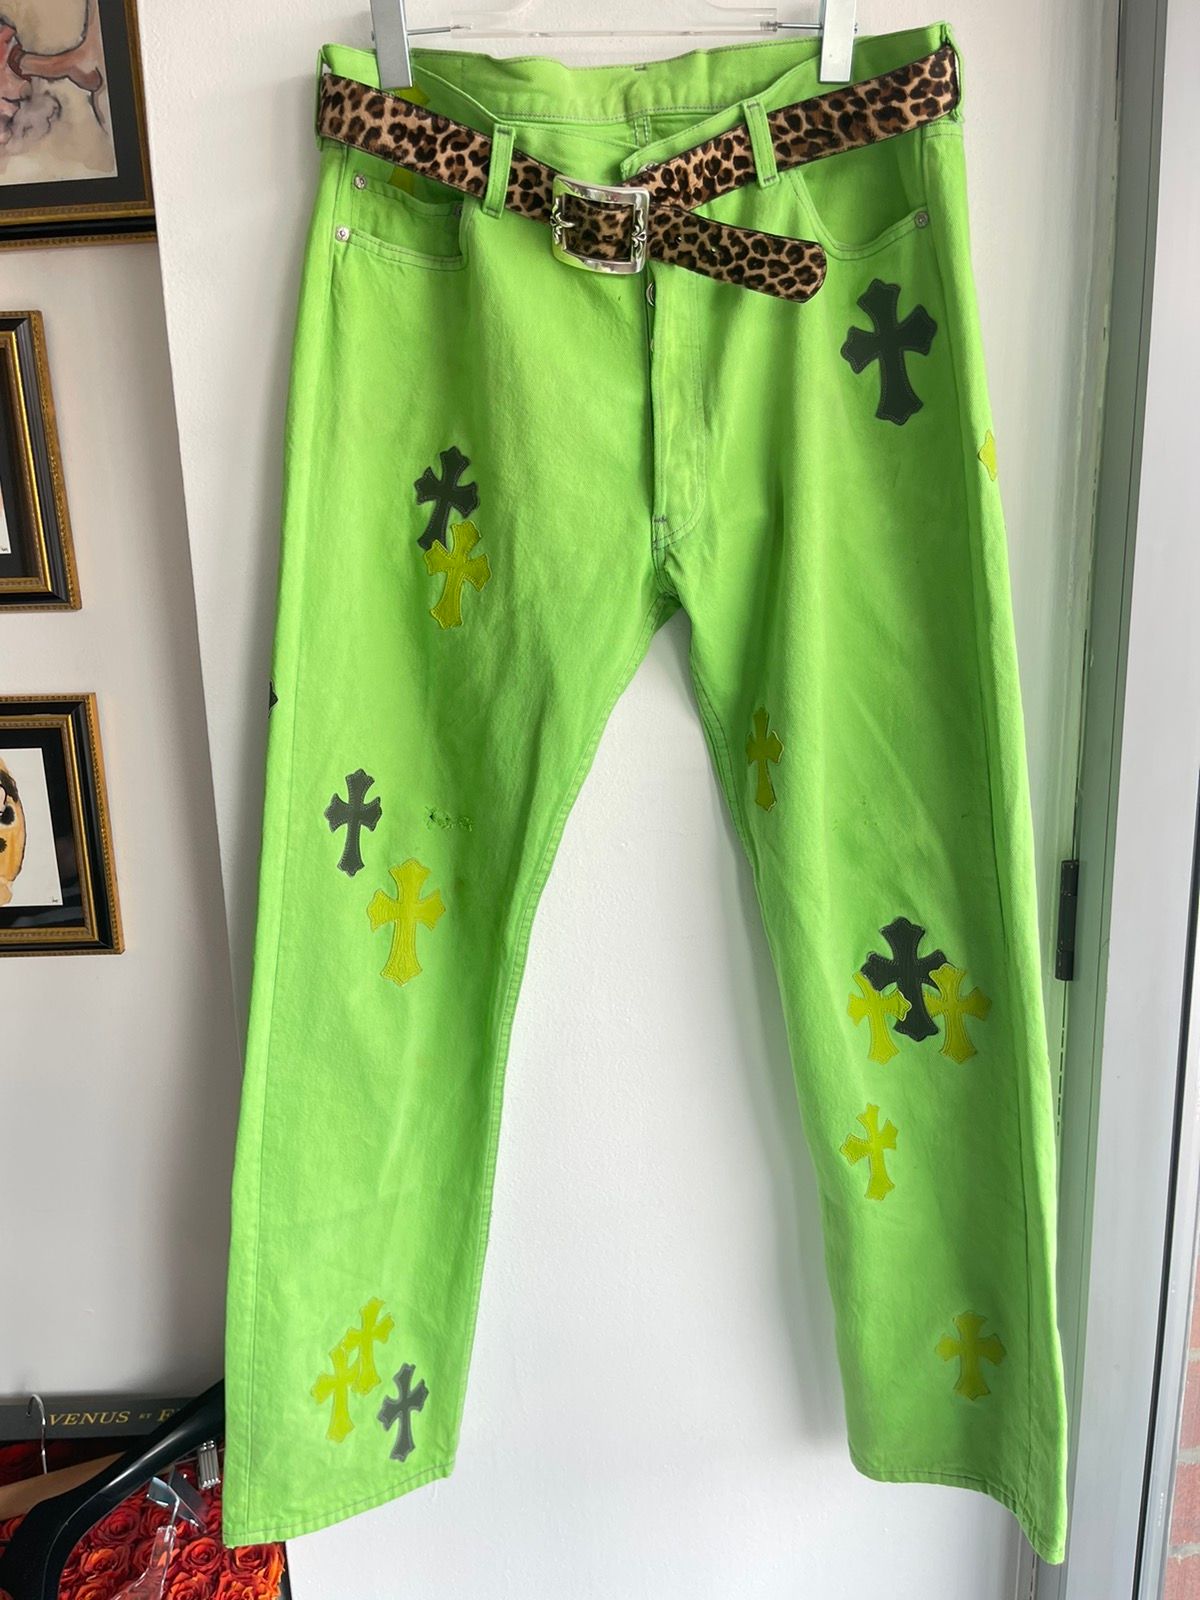 Chrome Hearts Green & Leopard Cross Patch Jeans